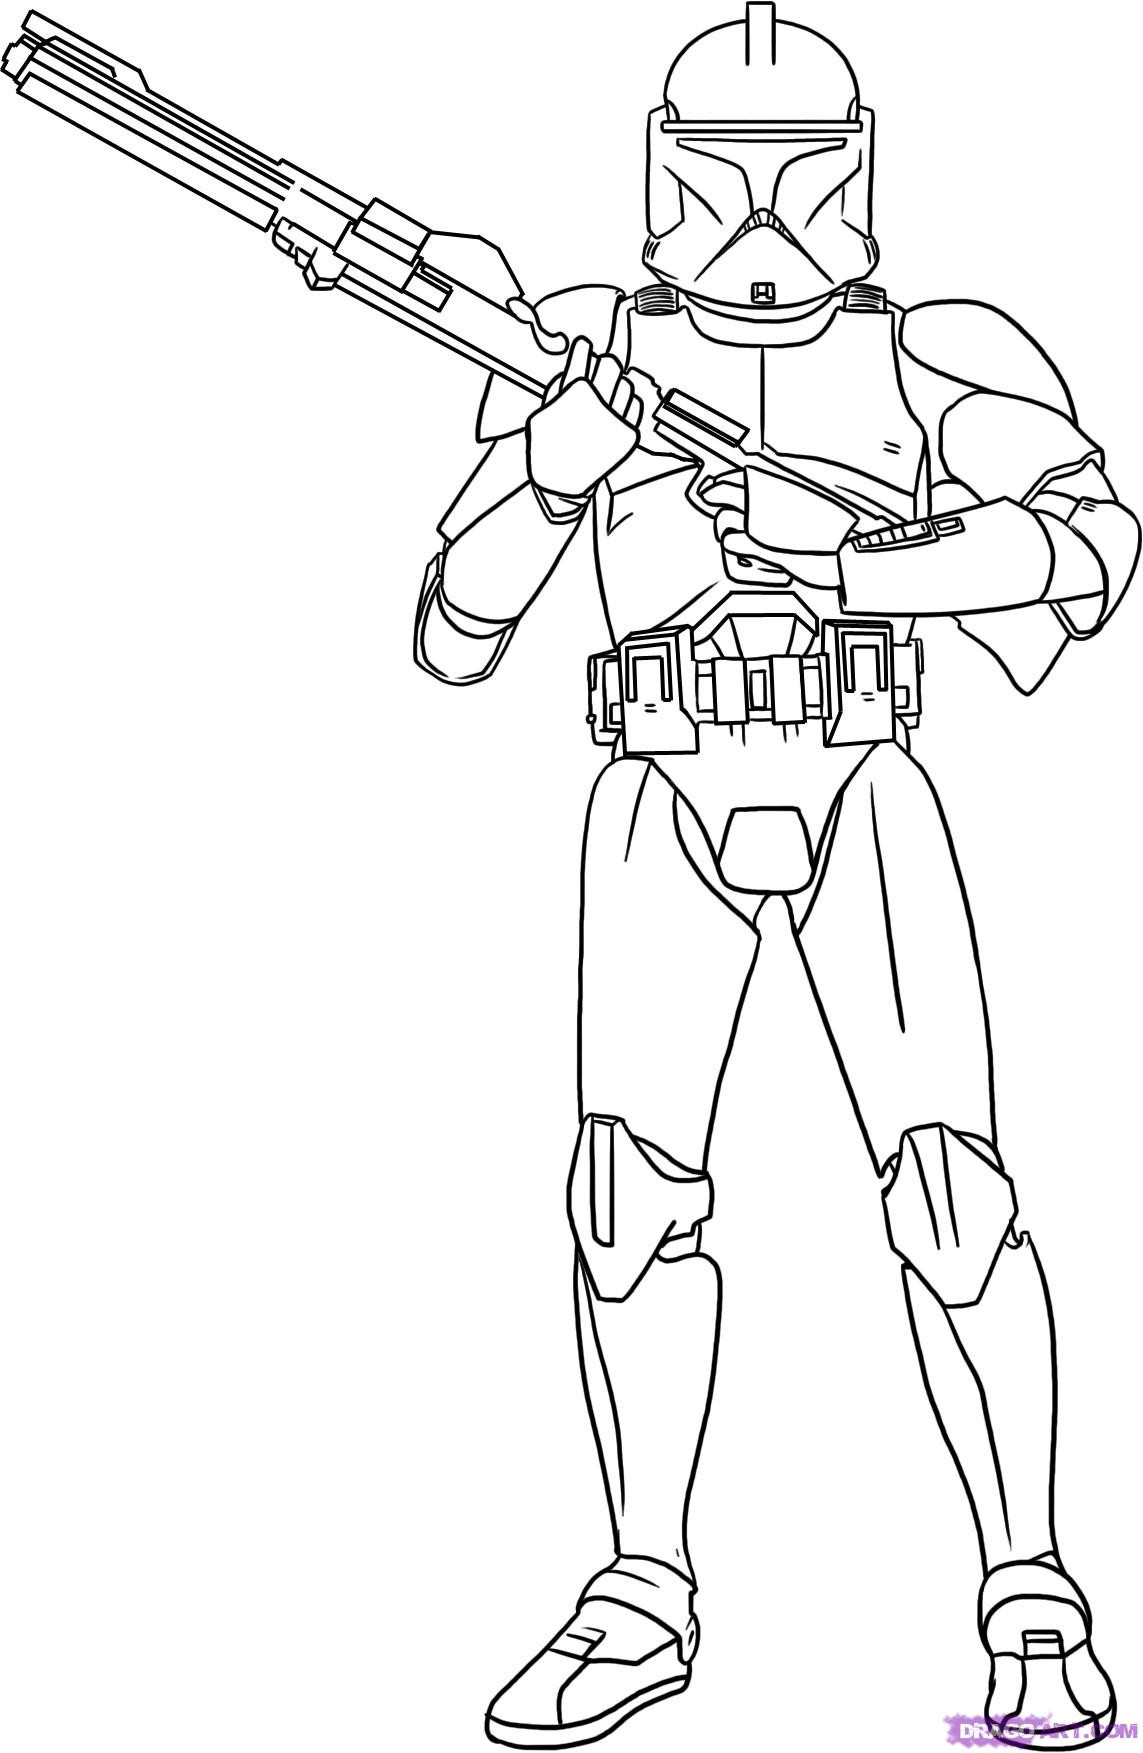 Free Coloring Sheets For Star Wars
 Free Printable Star Wars Coloring Pages For Kids